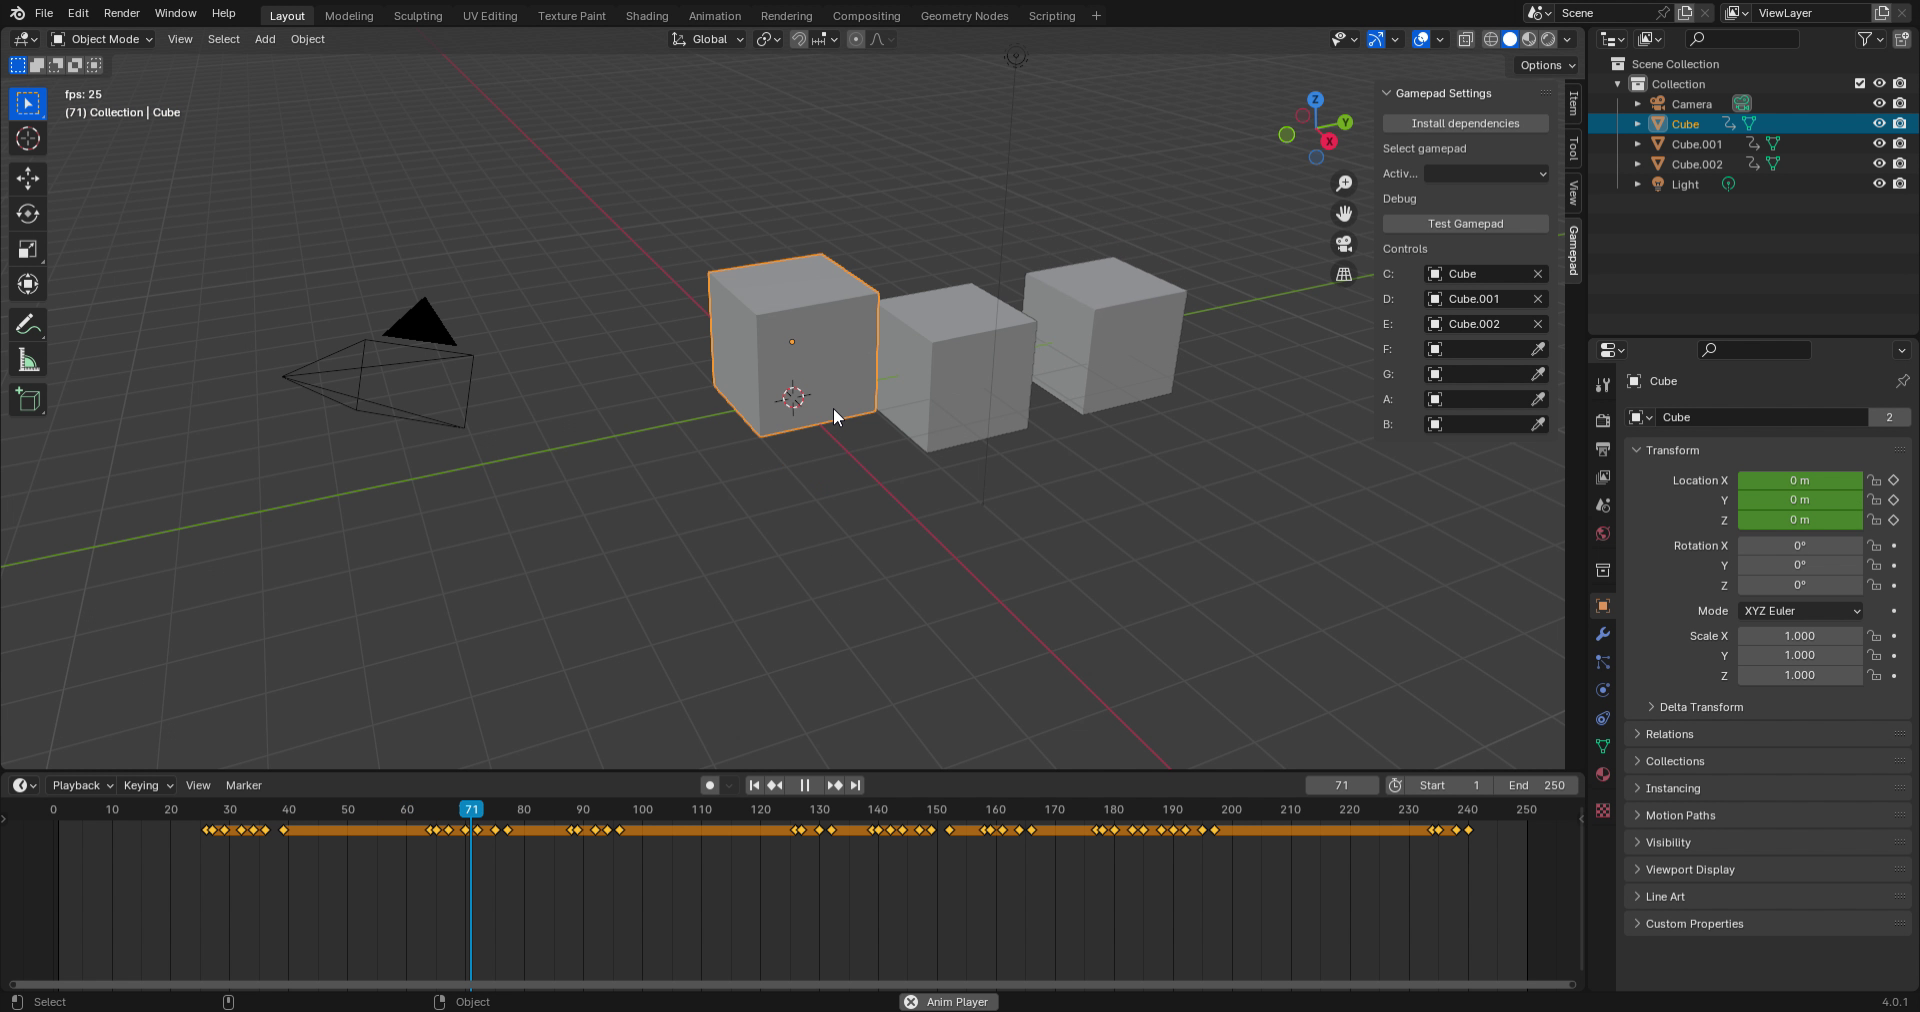 Blender app with 3 cubes side by side, with the first selected and slightly raised in Z space. The timeline panel is open below to show the cube’s keyframes, which there are several going from down to up to down again.